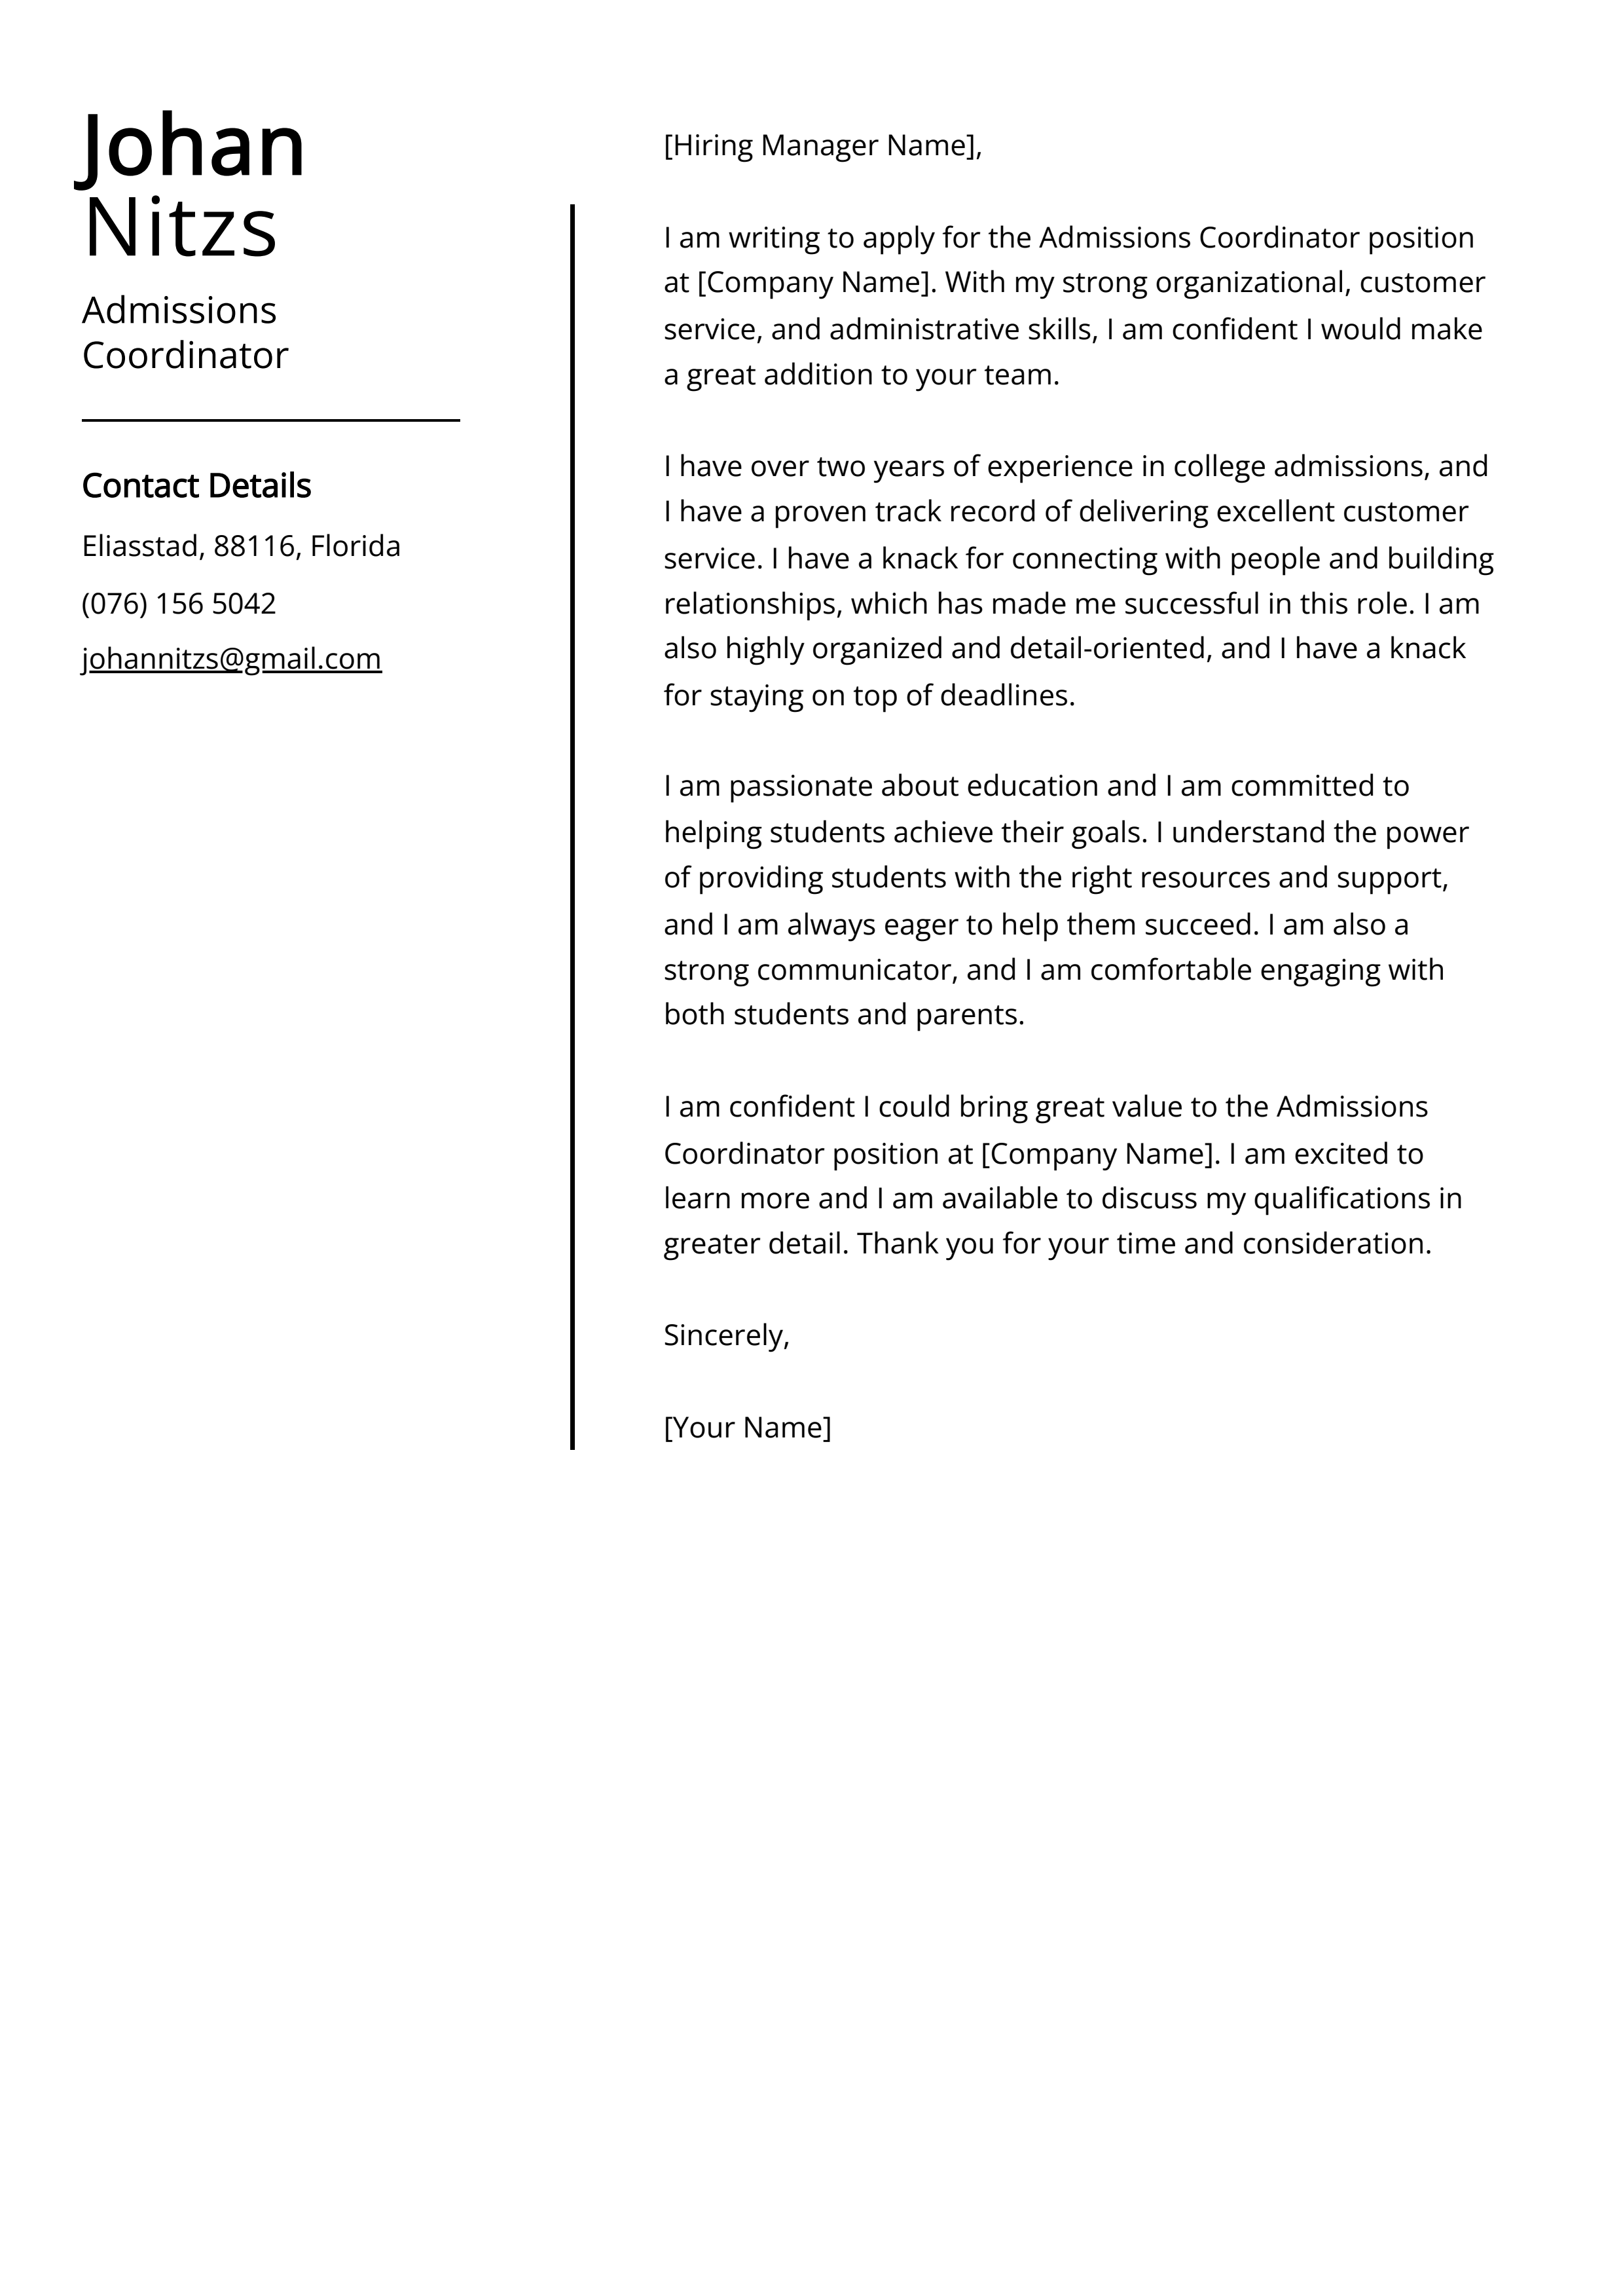 Admissions Coordinator Cover Letter Example